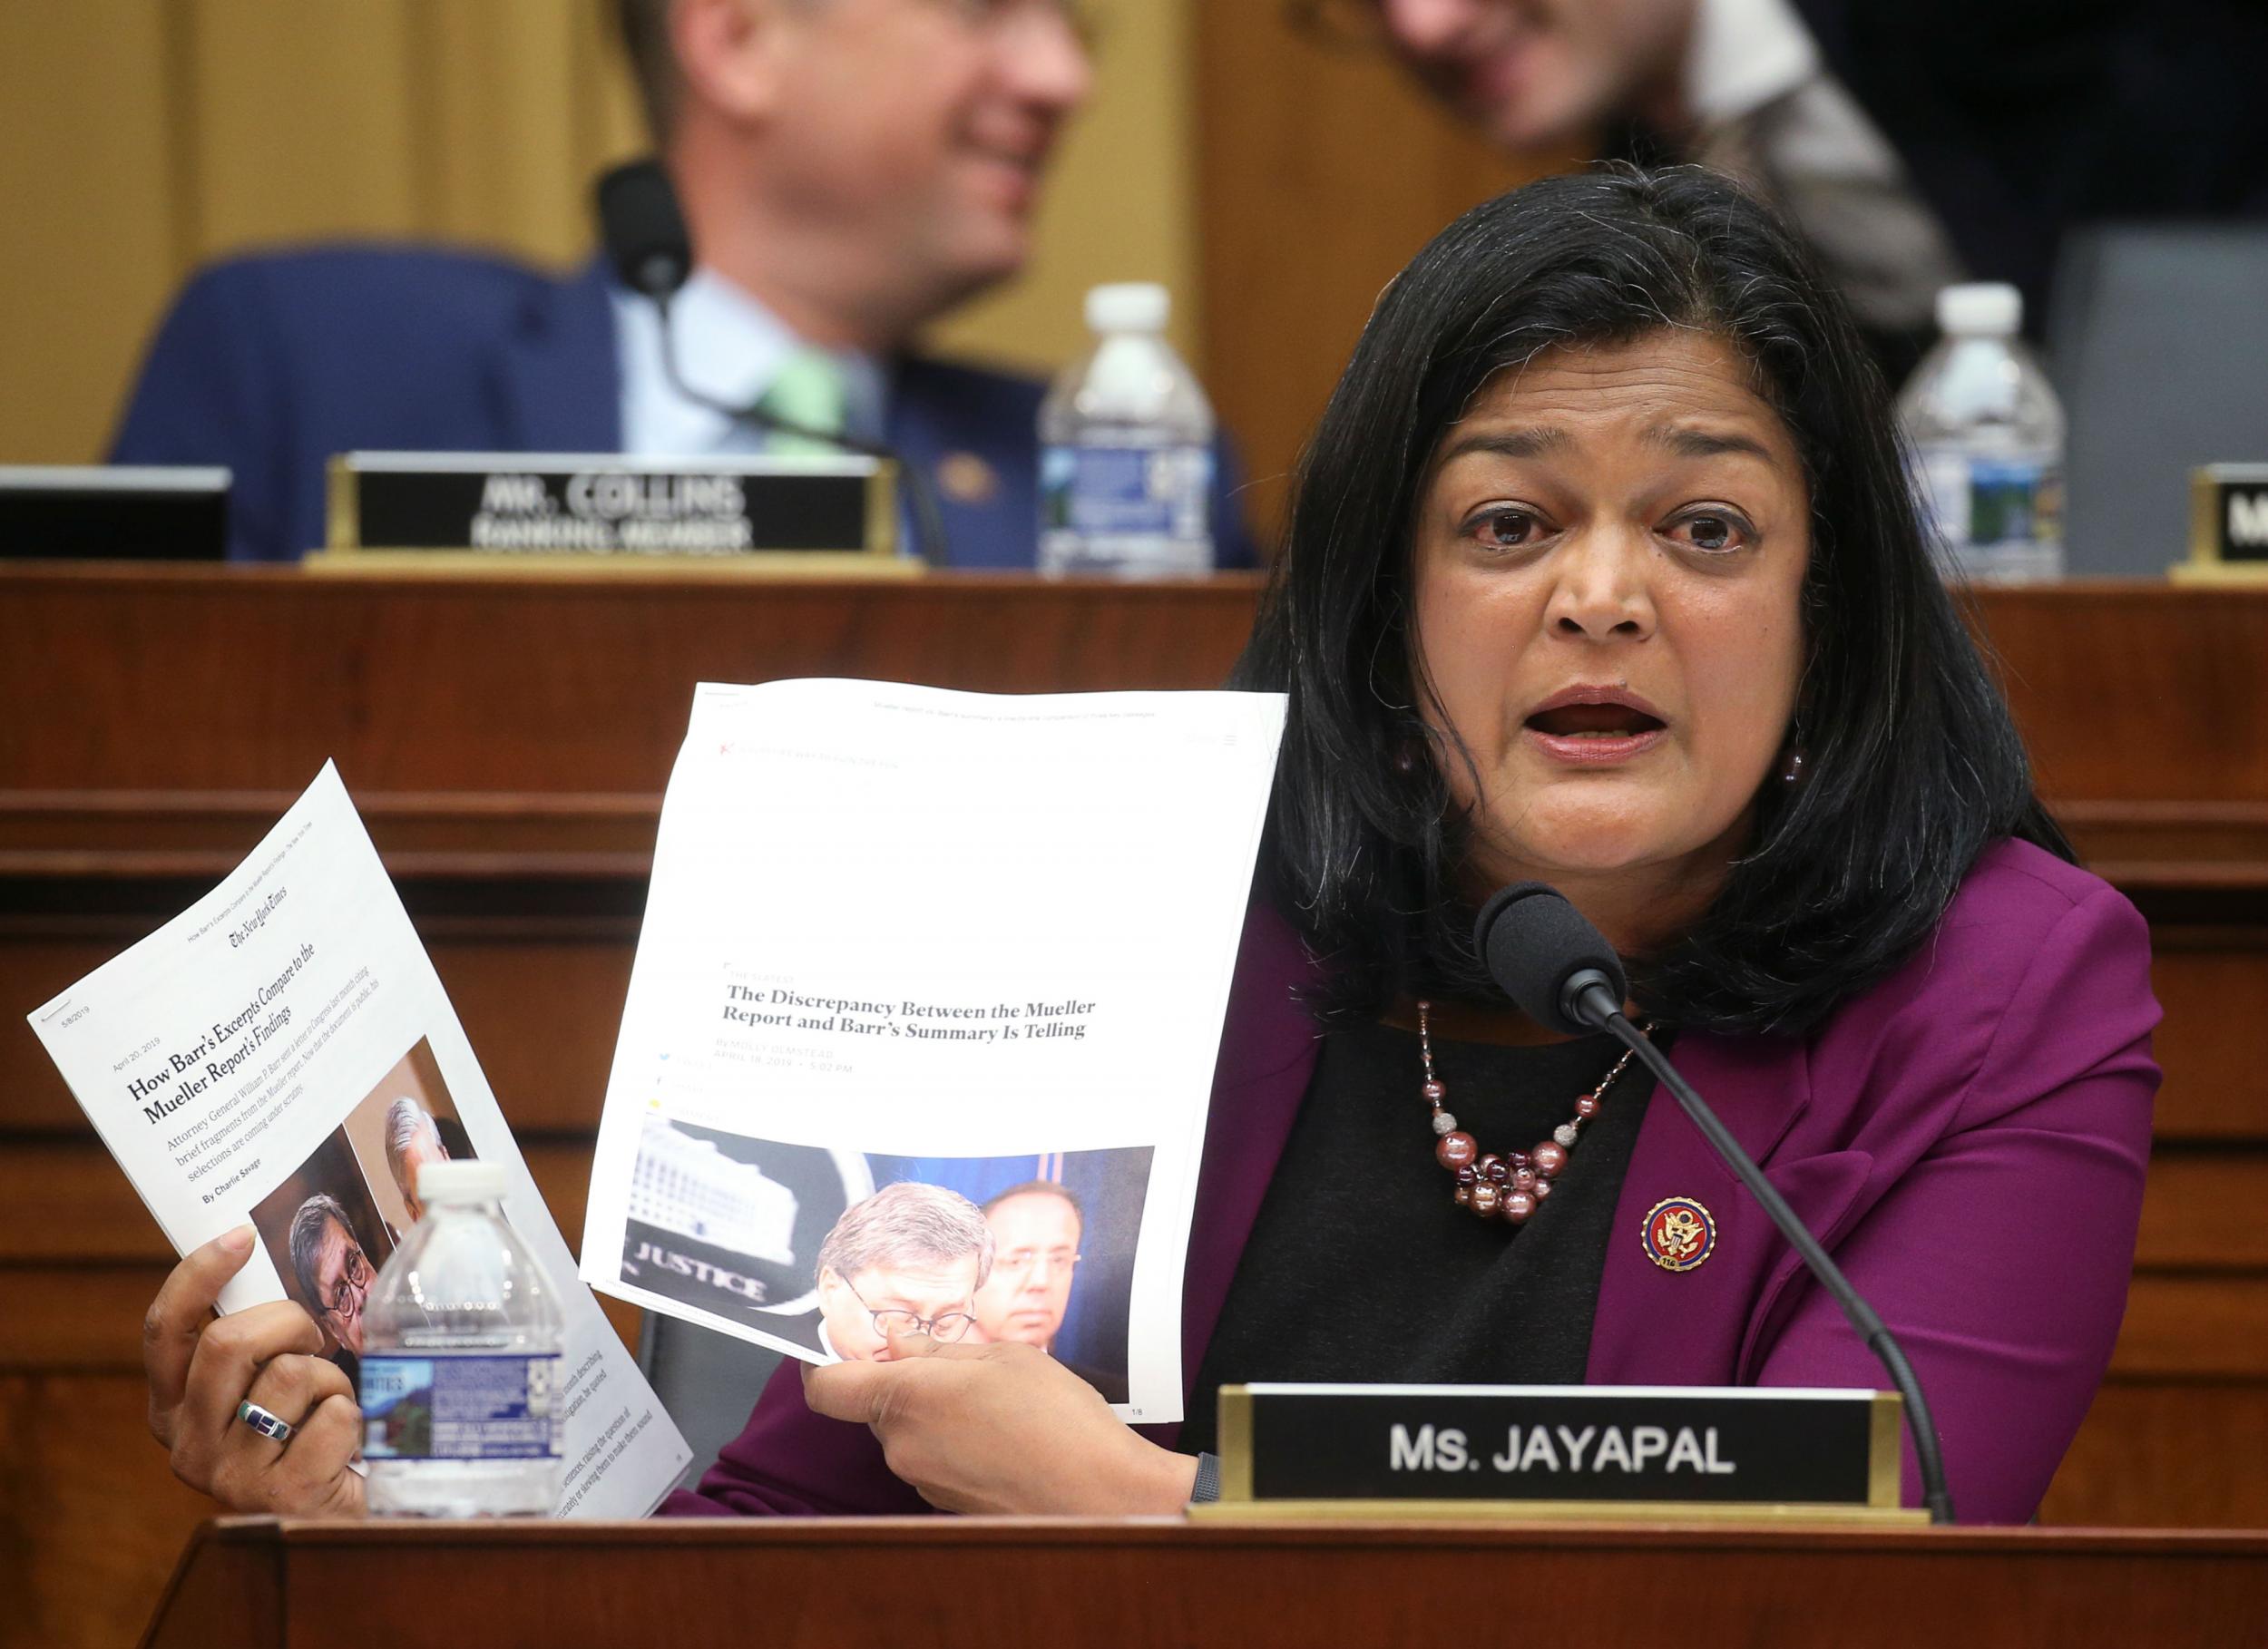 A member of the house judiciary committee, Jayapal supports impeaching the president